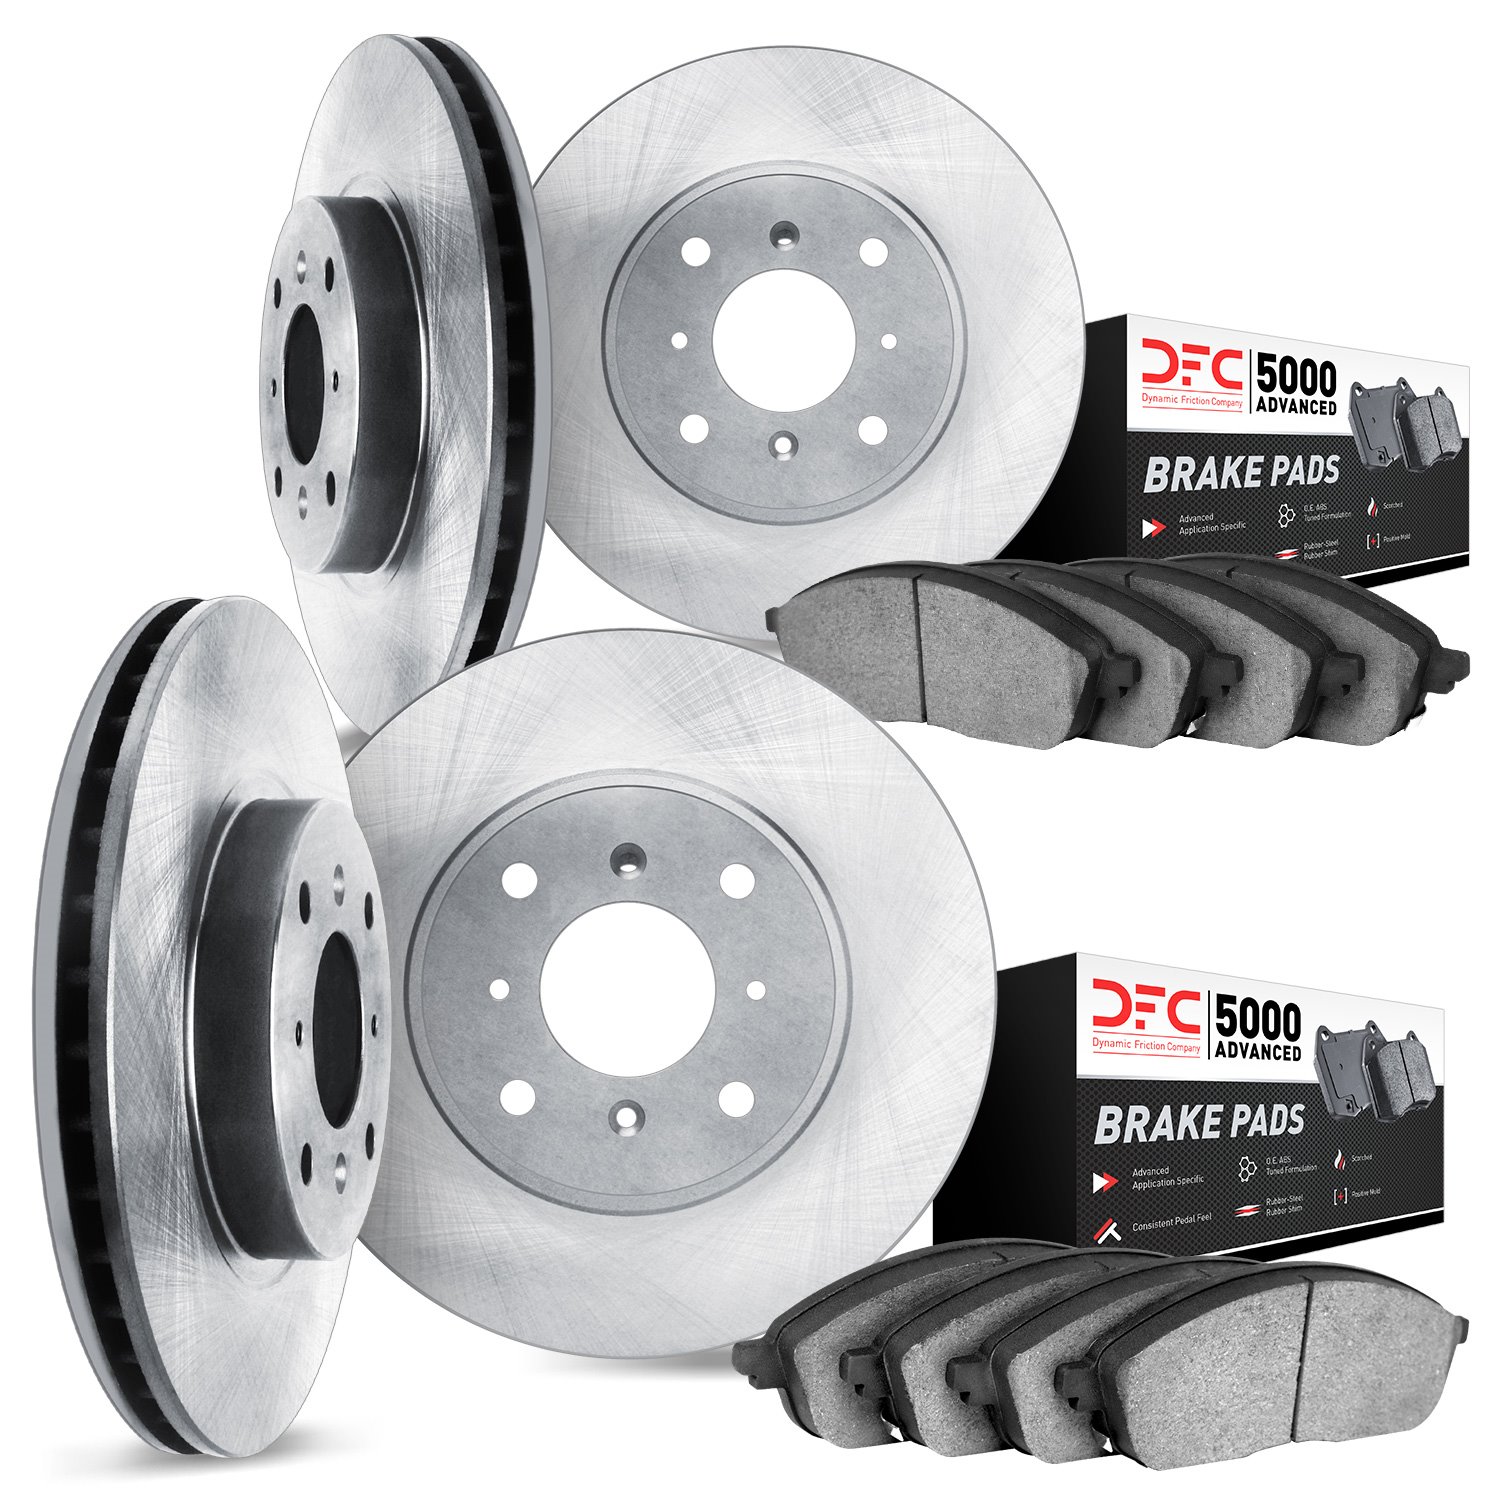 6504-37016 Brake Rotors w/5000 Advanced Brake Pads Kit, 1983-1990 GM, Position: Front and Rear